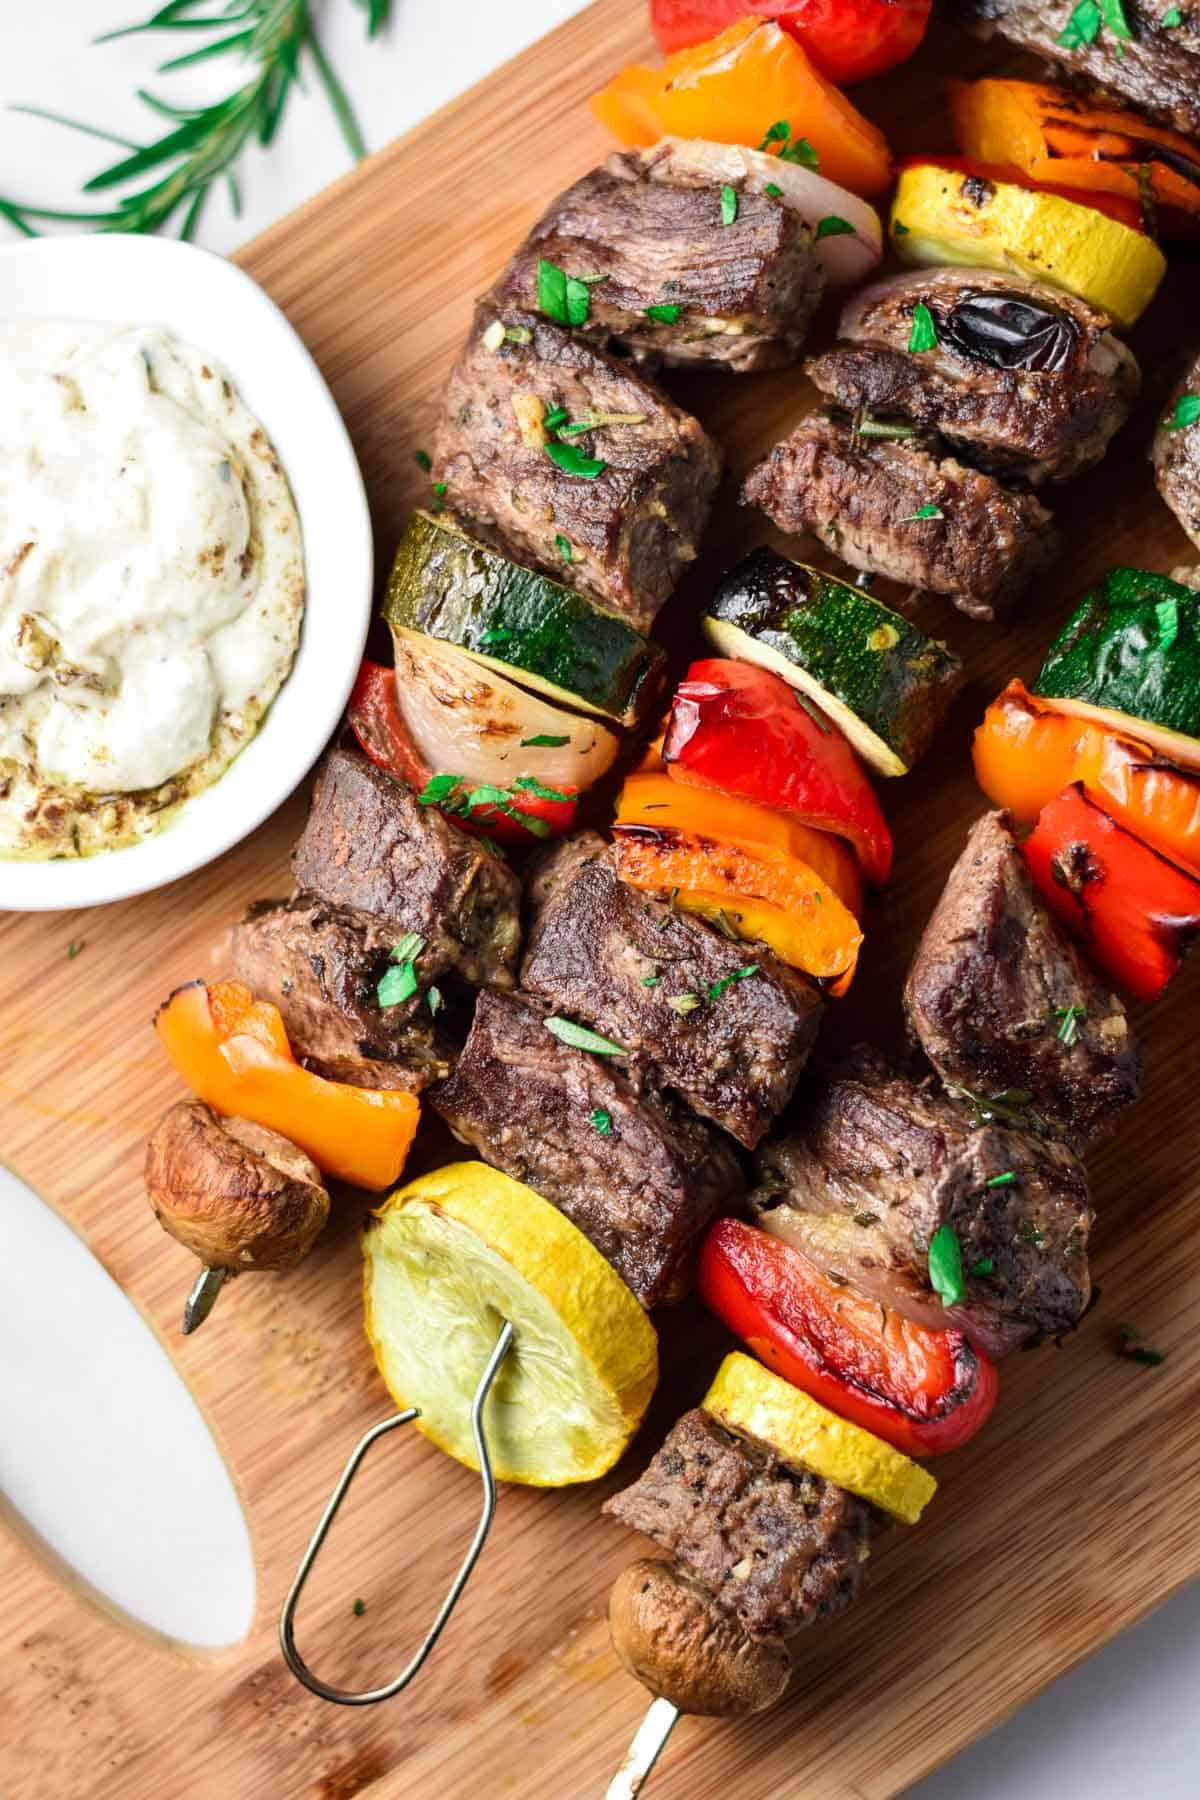 Beef kabobs on a wood cutting board next to a whipped garlic dip.